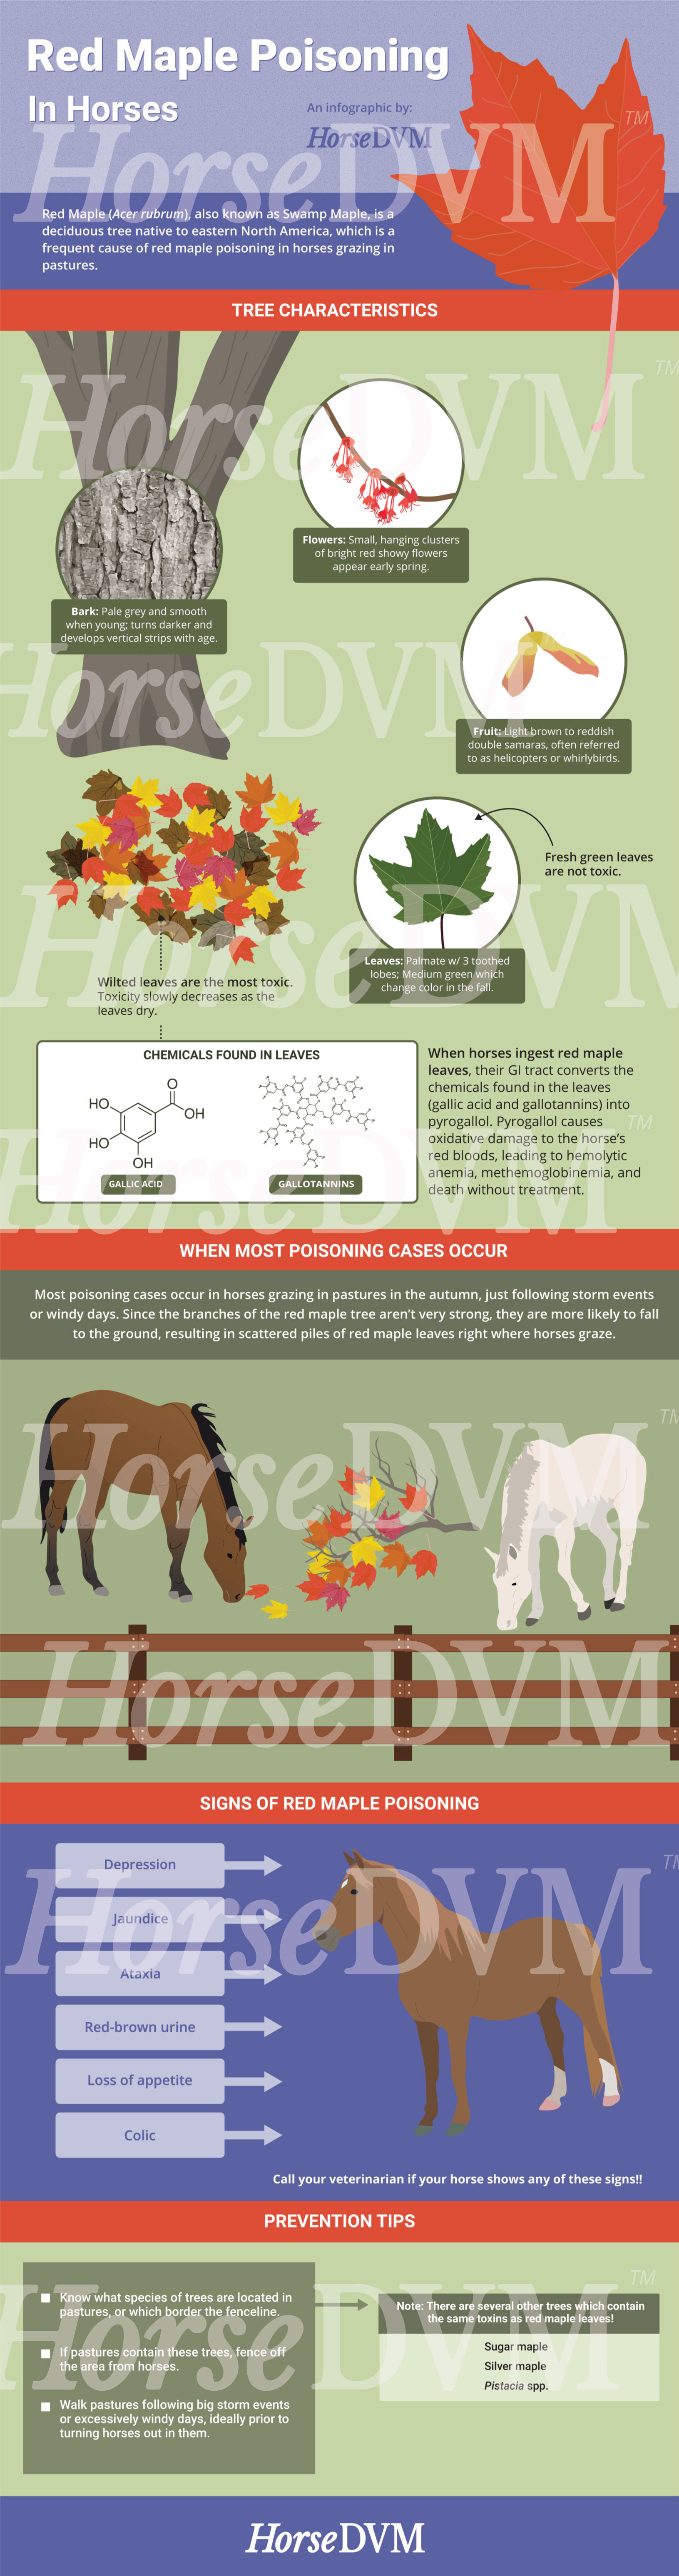 HorseDVM - horsedvm-red-maple-poisoning-infographic